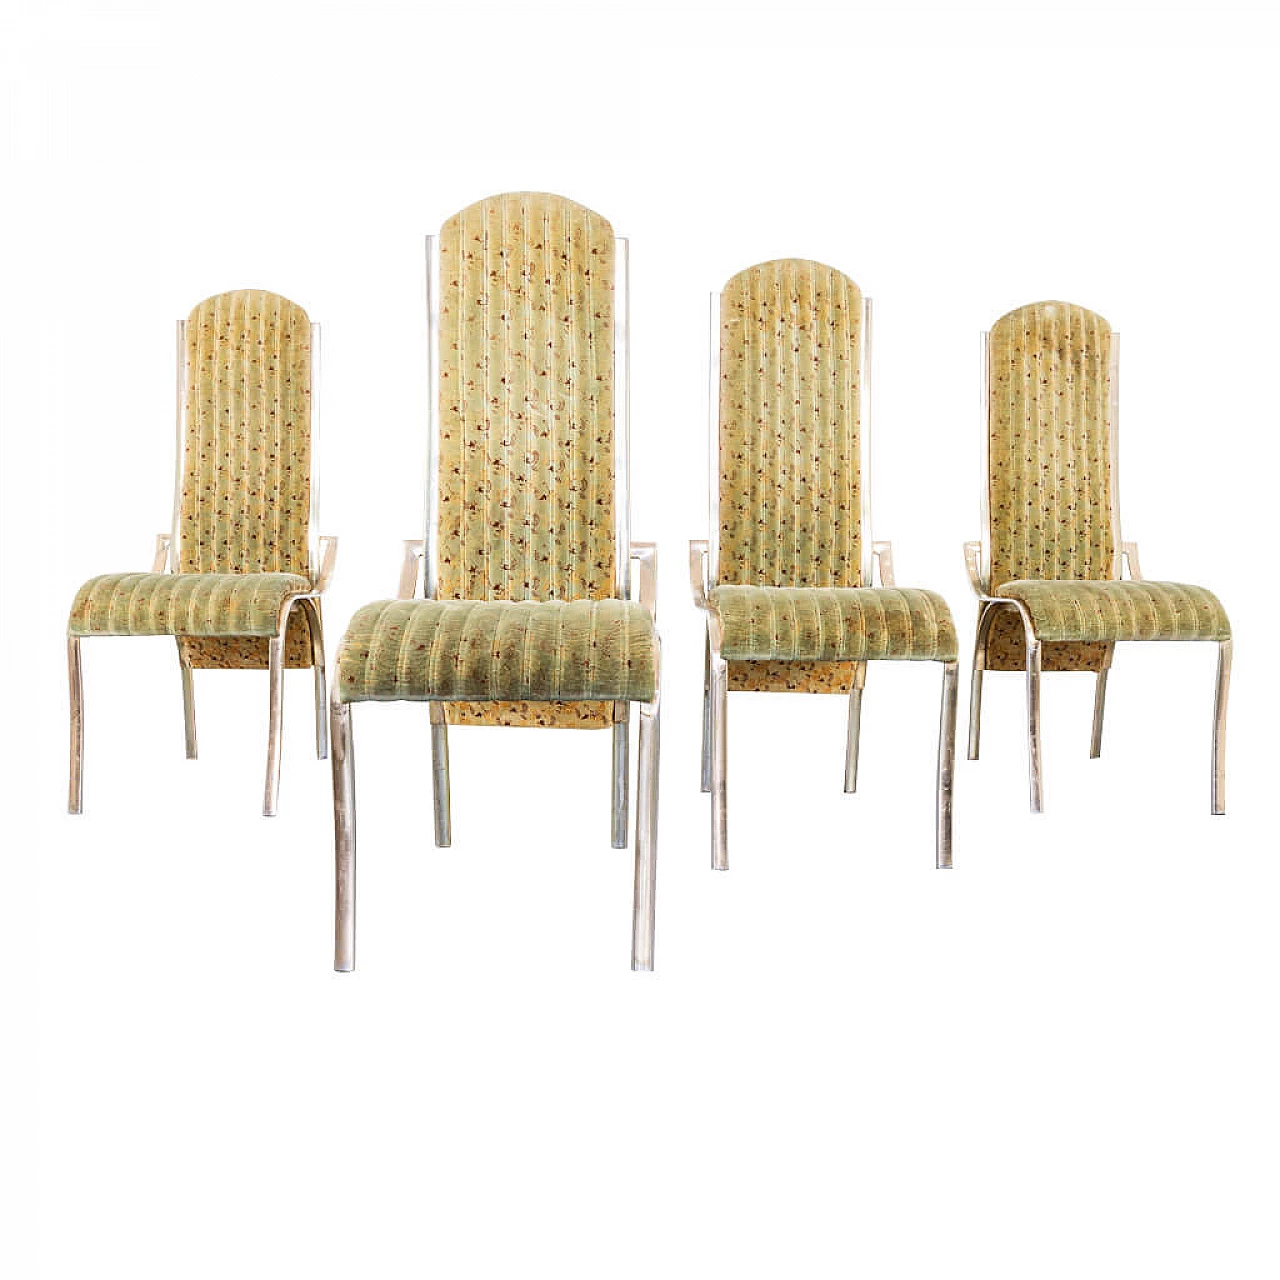 Set 4 curved chairs in golden Metal and Alcantara fabric, 70s 1225077